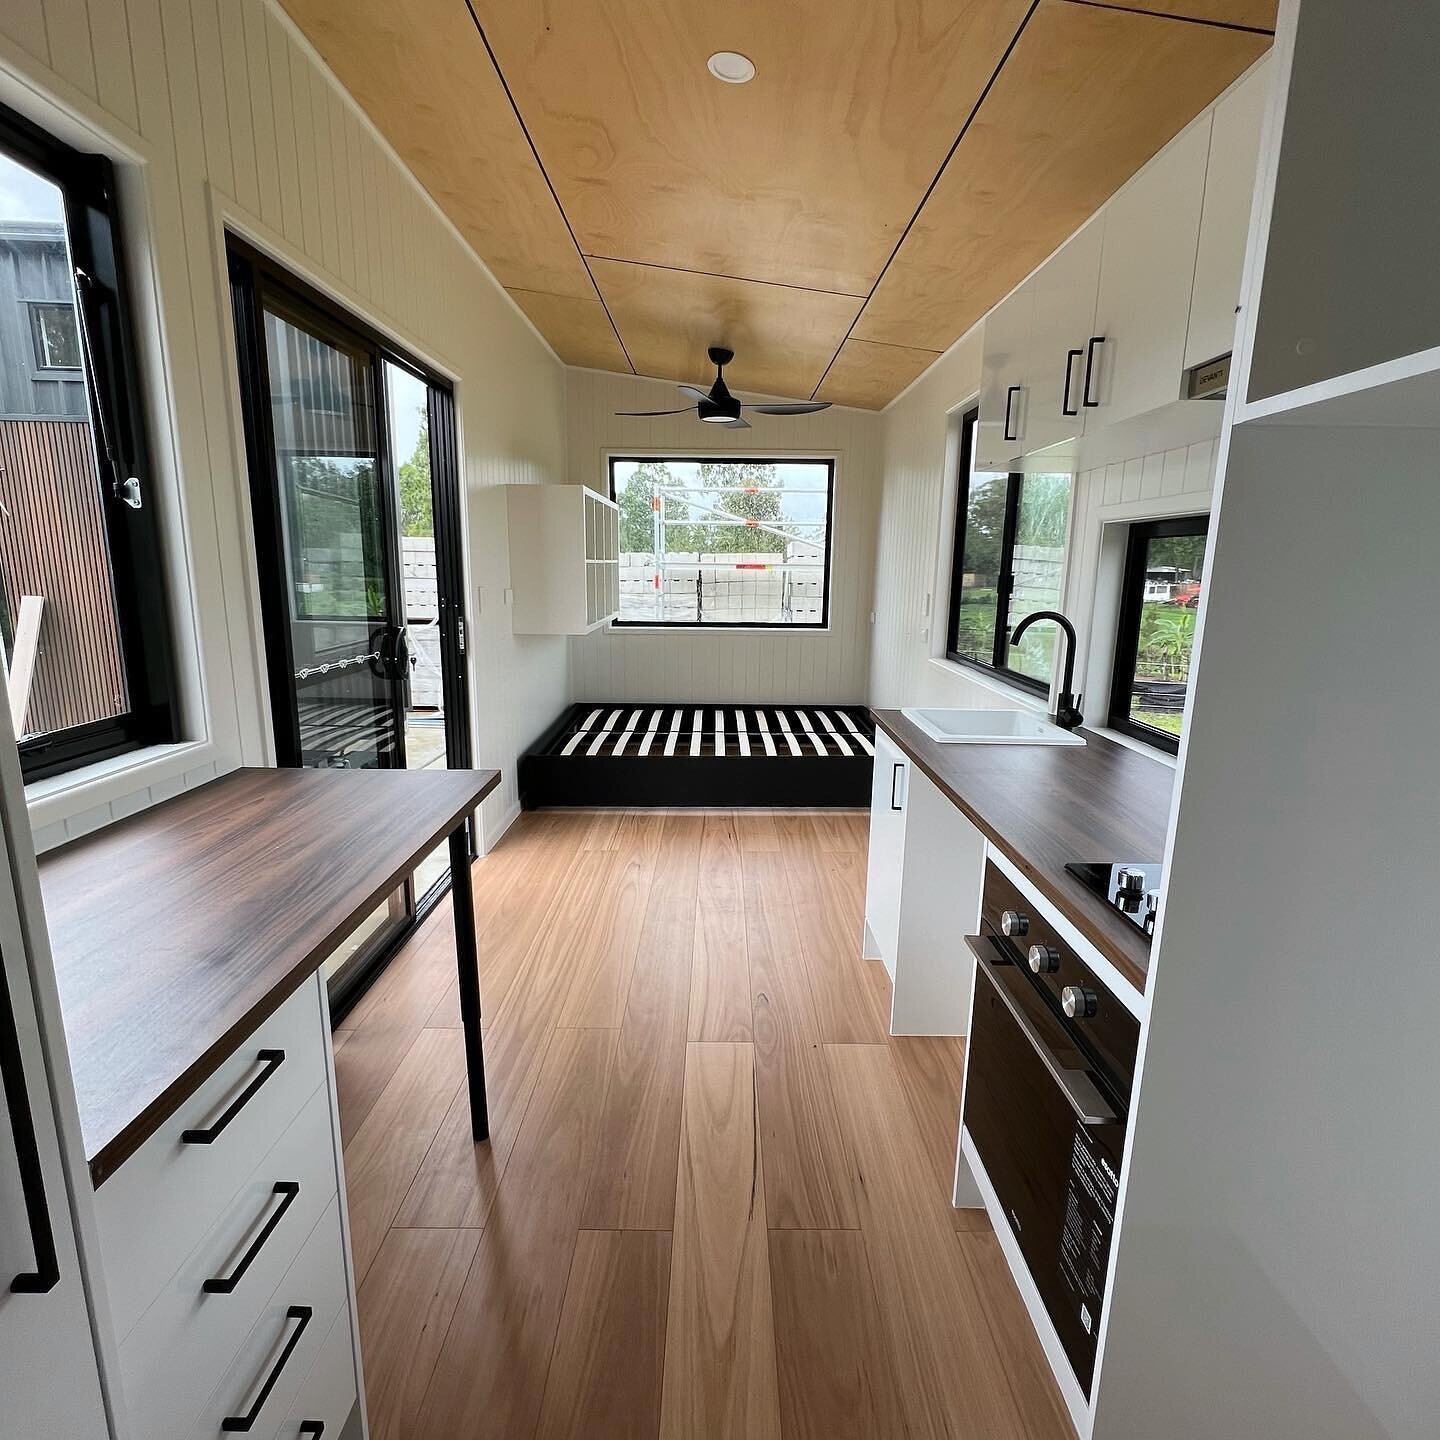 This single storey Tiny Home packs everything you need to live comfortably in a Tiny space! Just in case you can&rsquo;t tell from the photos, this home includes space for a queen bed, space for a 2 seater lounge, 2 dining seats, a washing machine ca